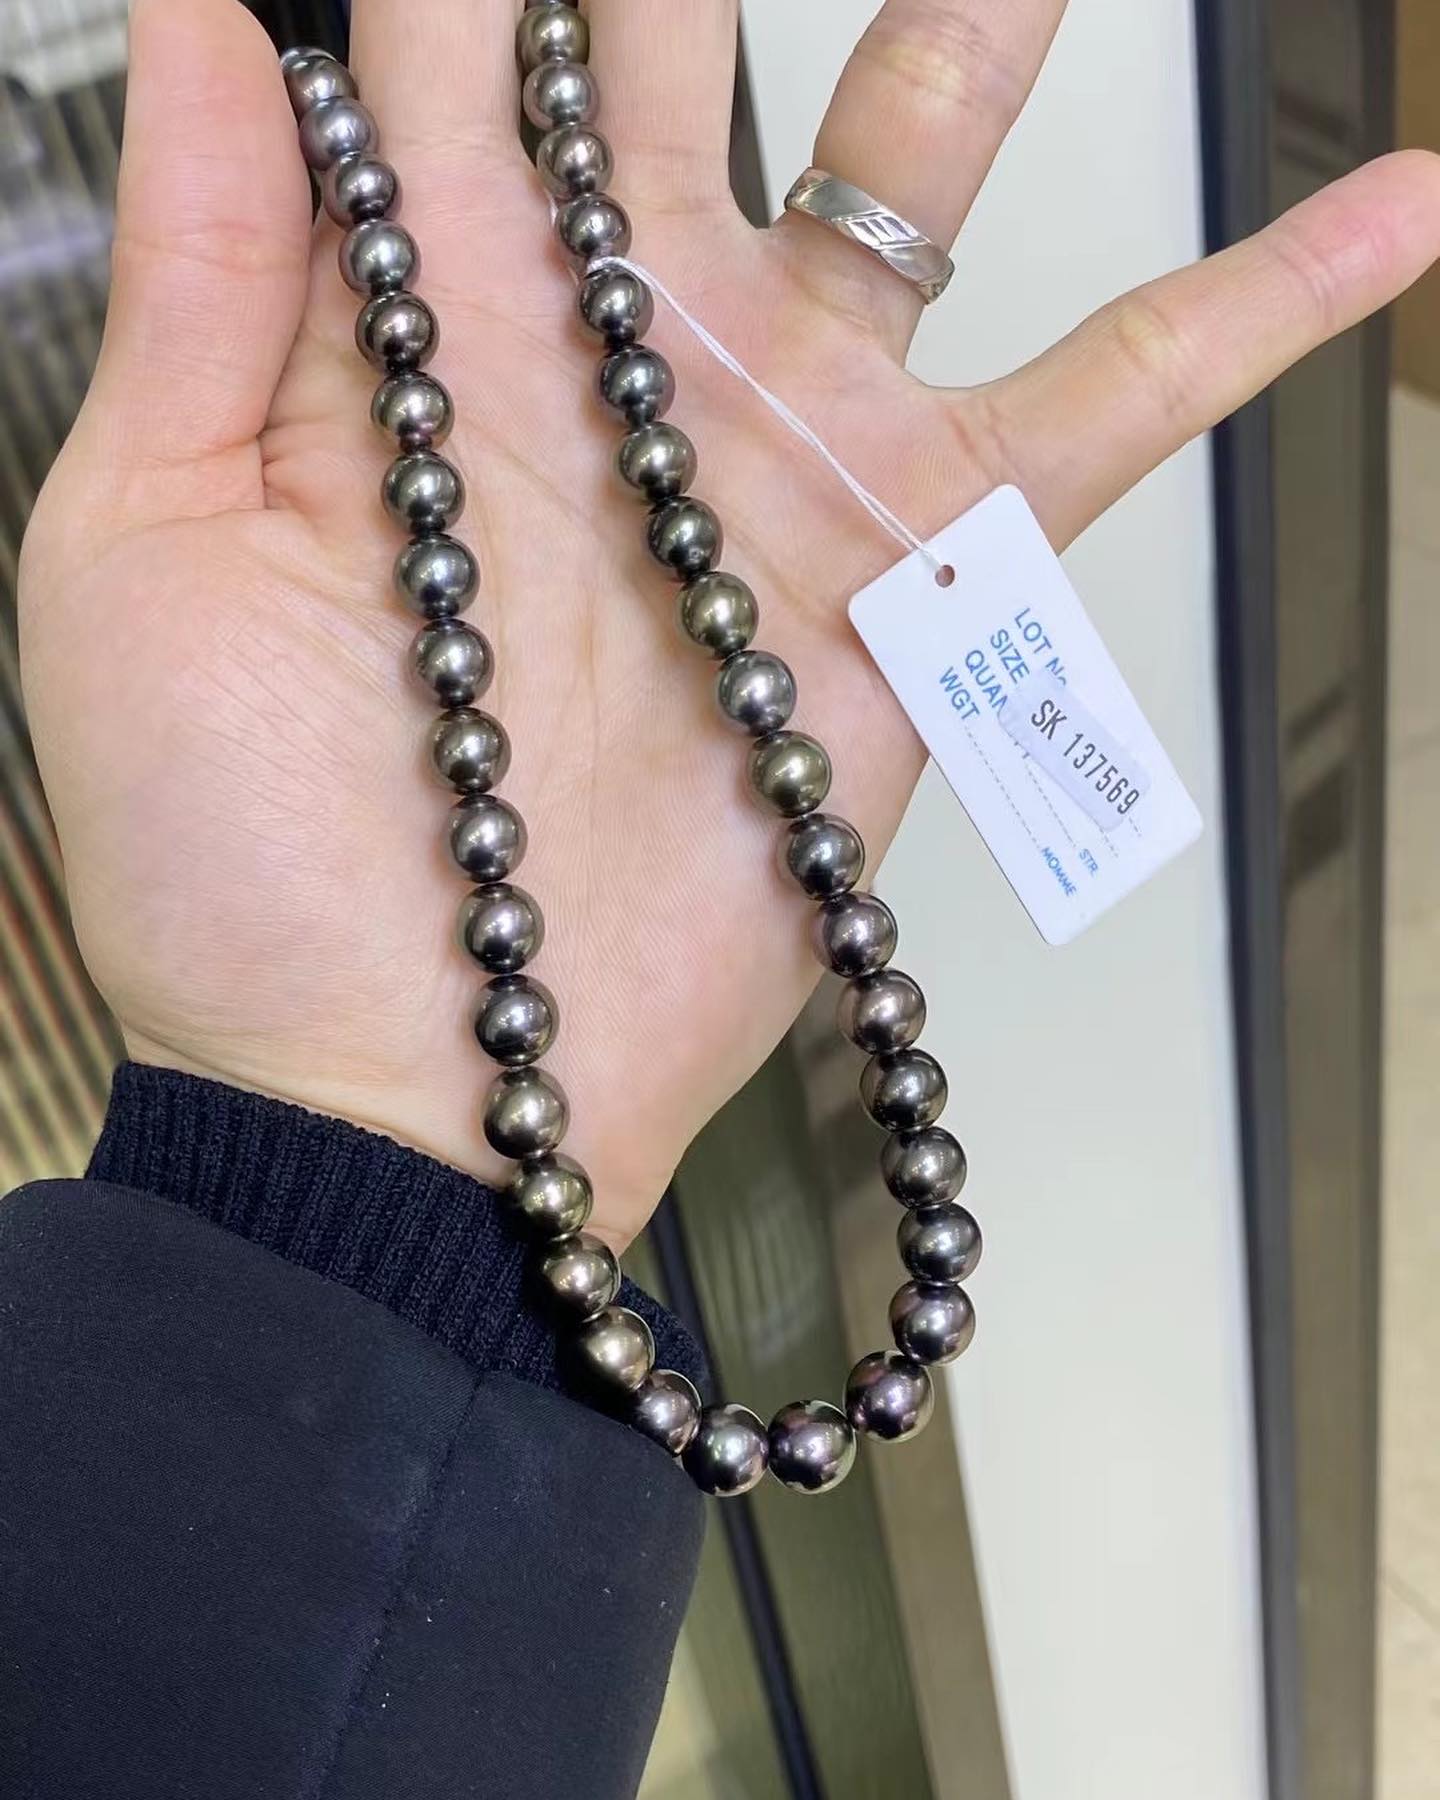 Black Color Tahitian Pearls Necklace